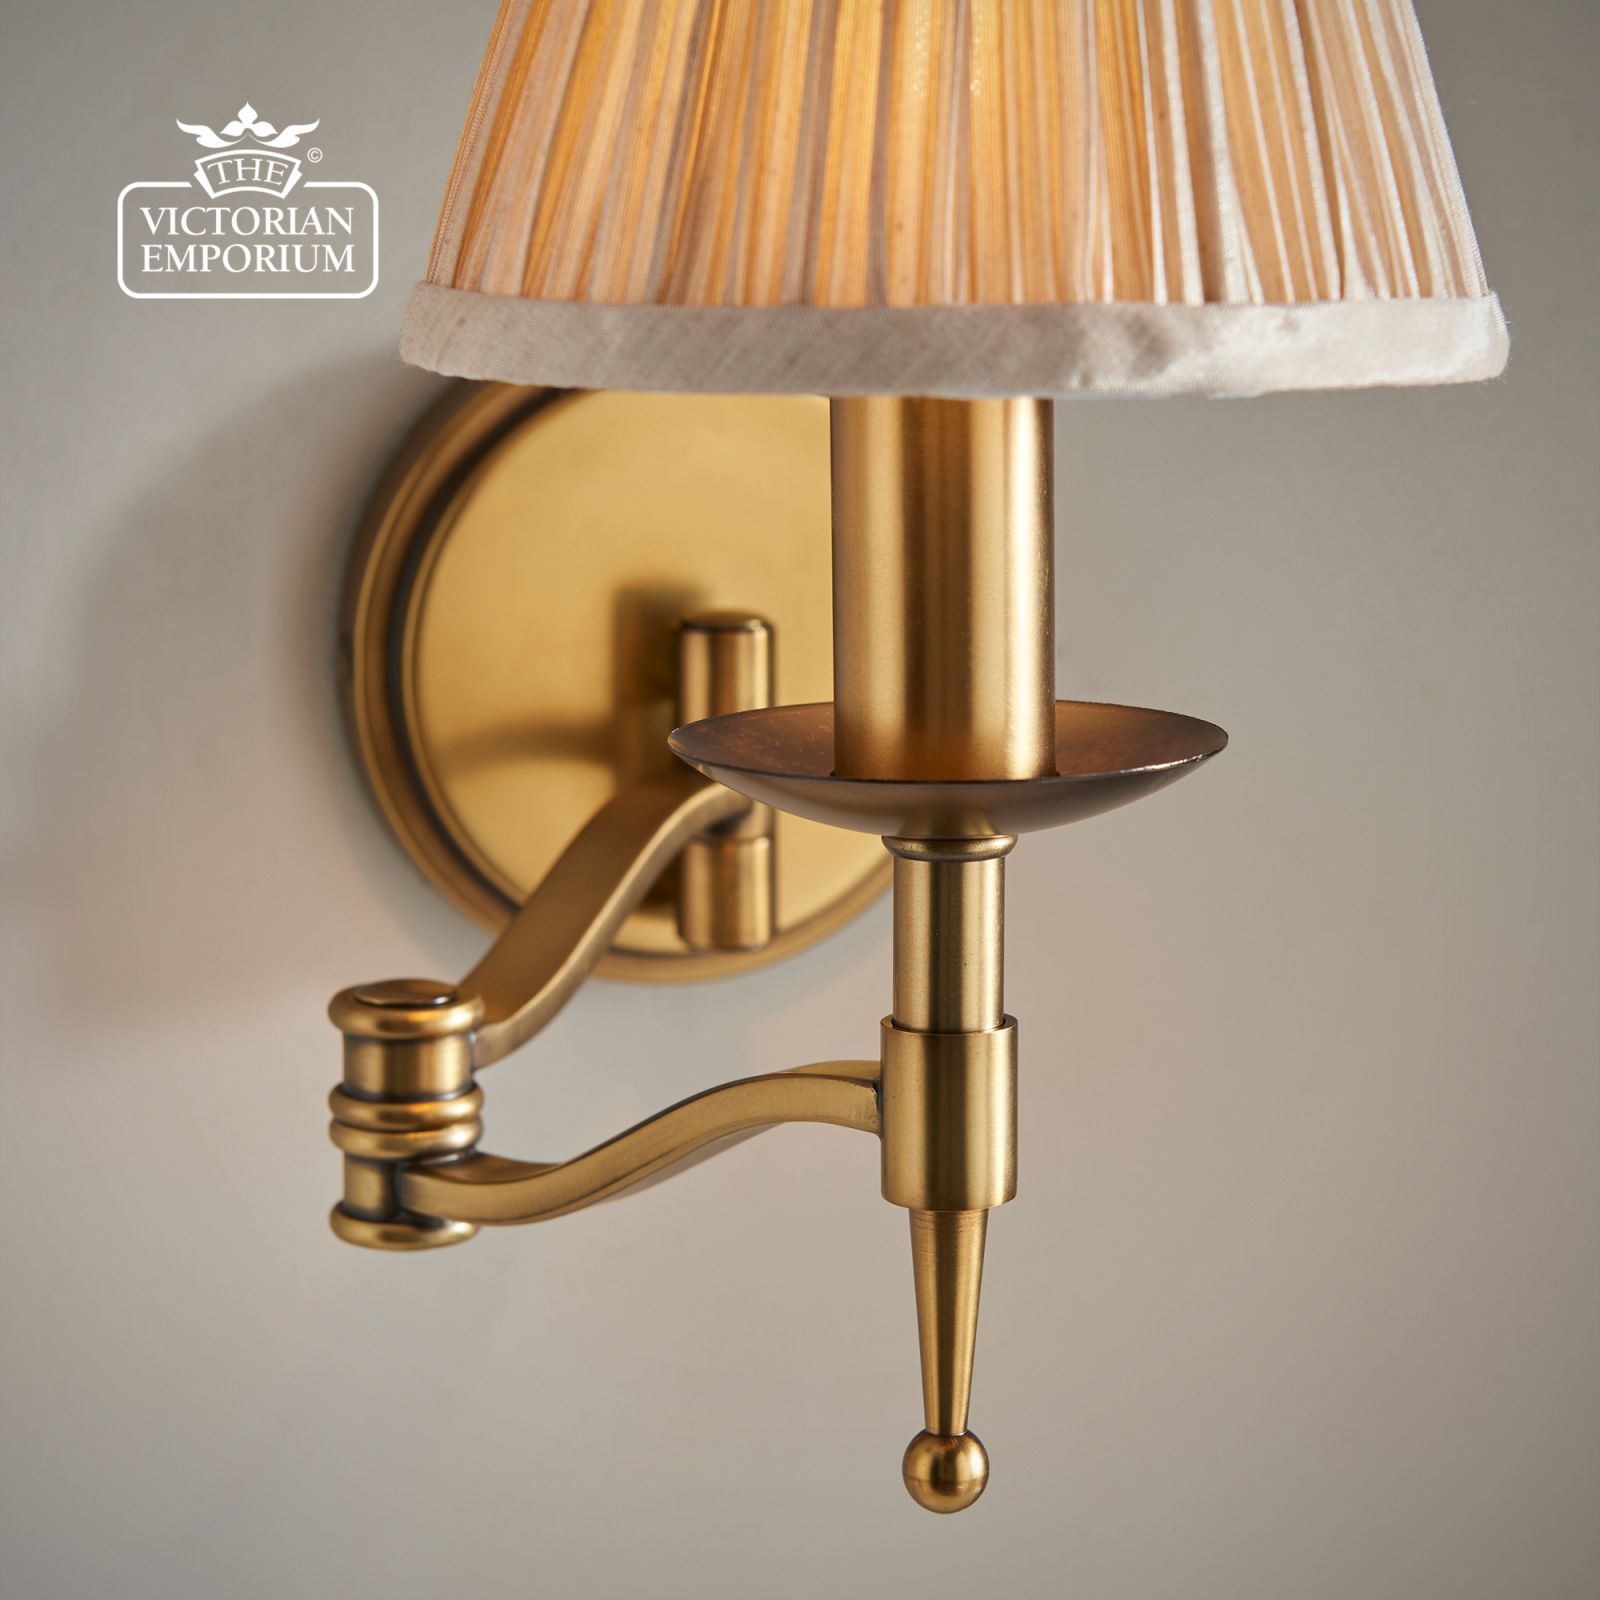 Stanford antique brass Swing arm wall light with beige shade